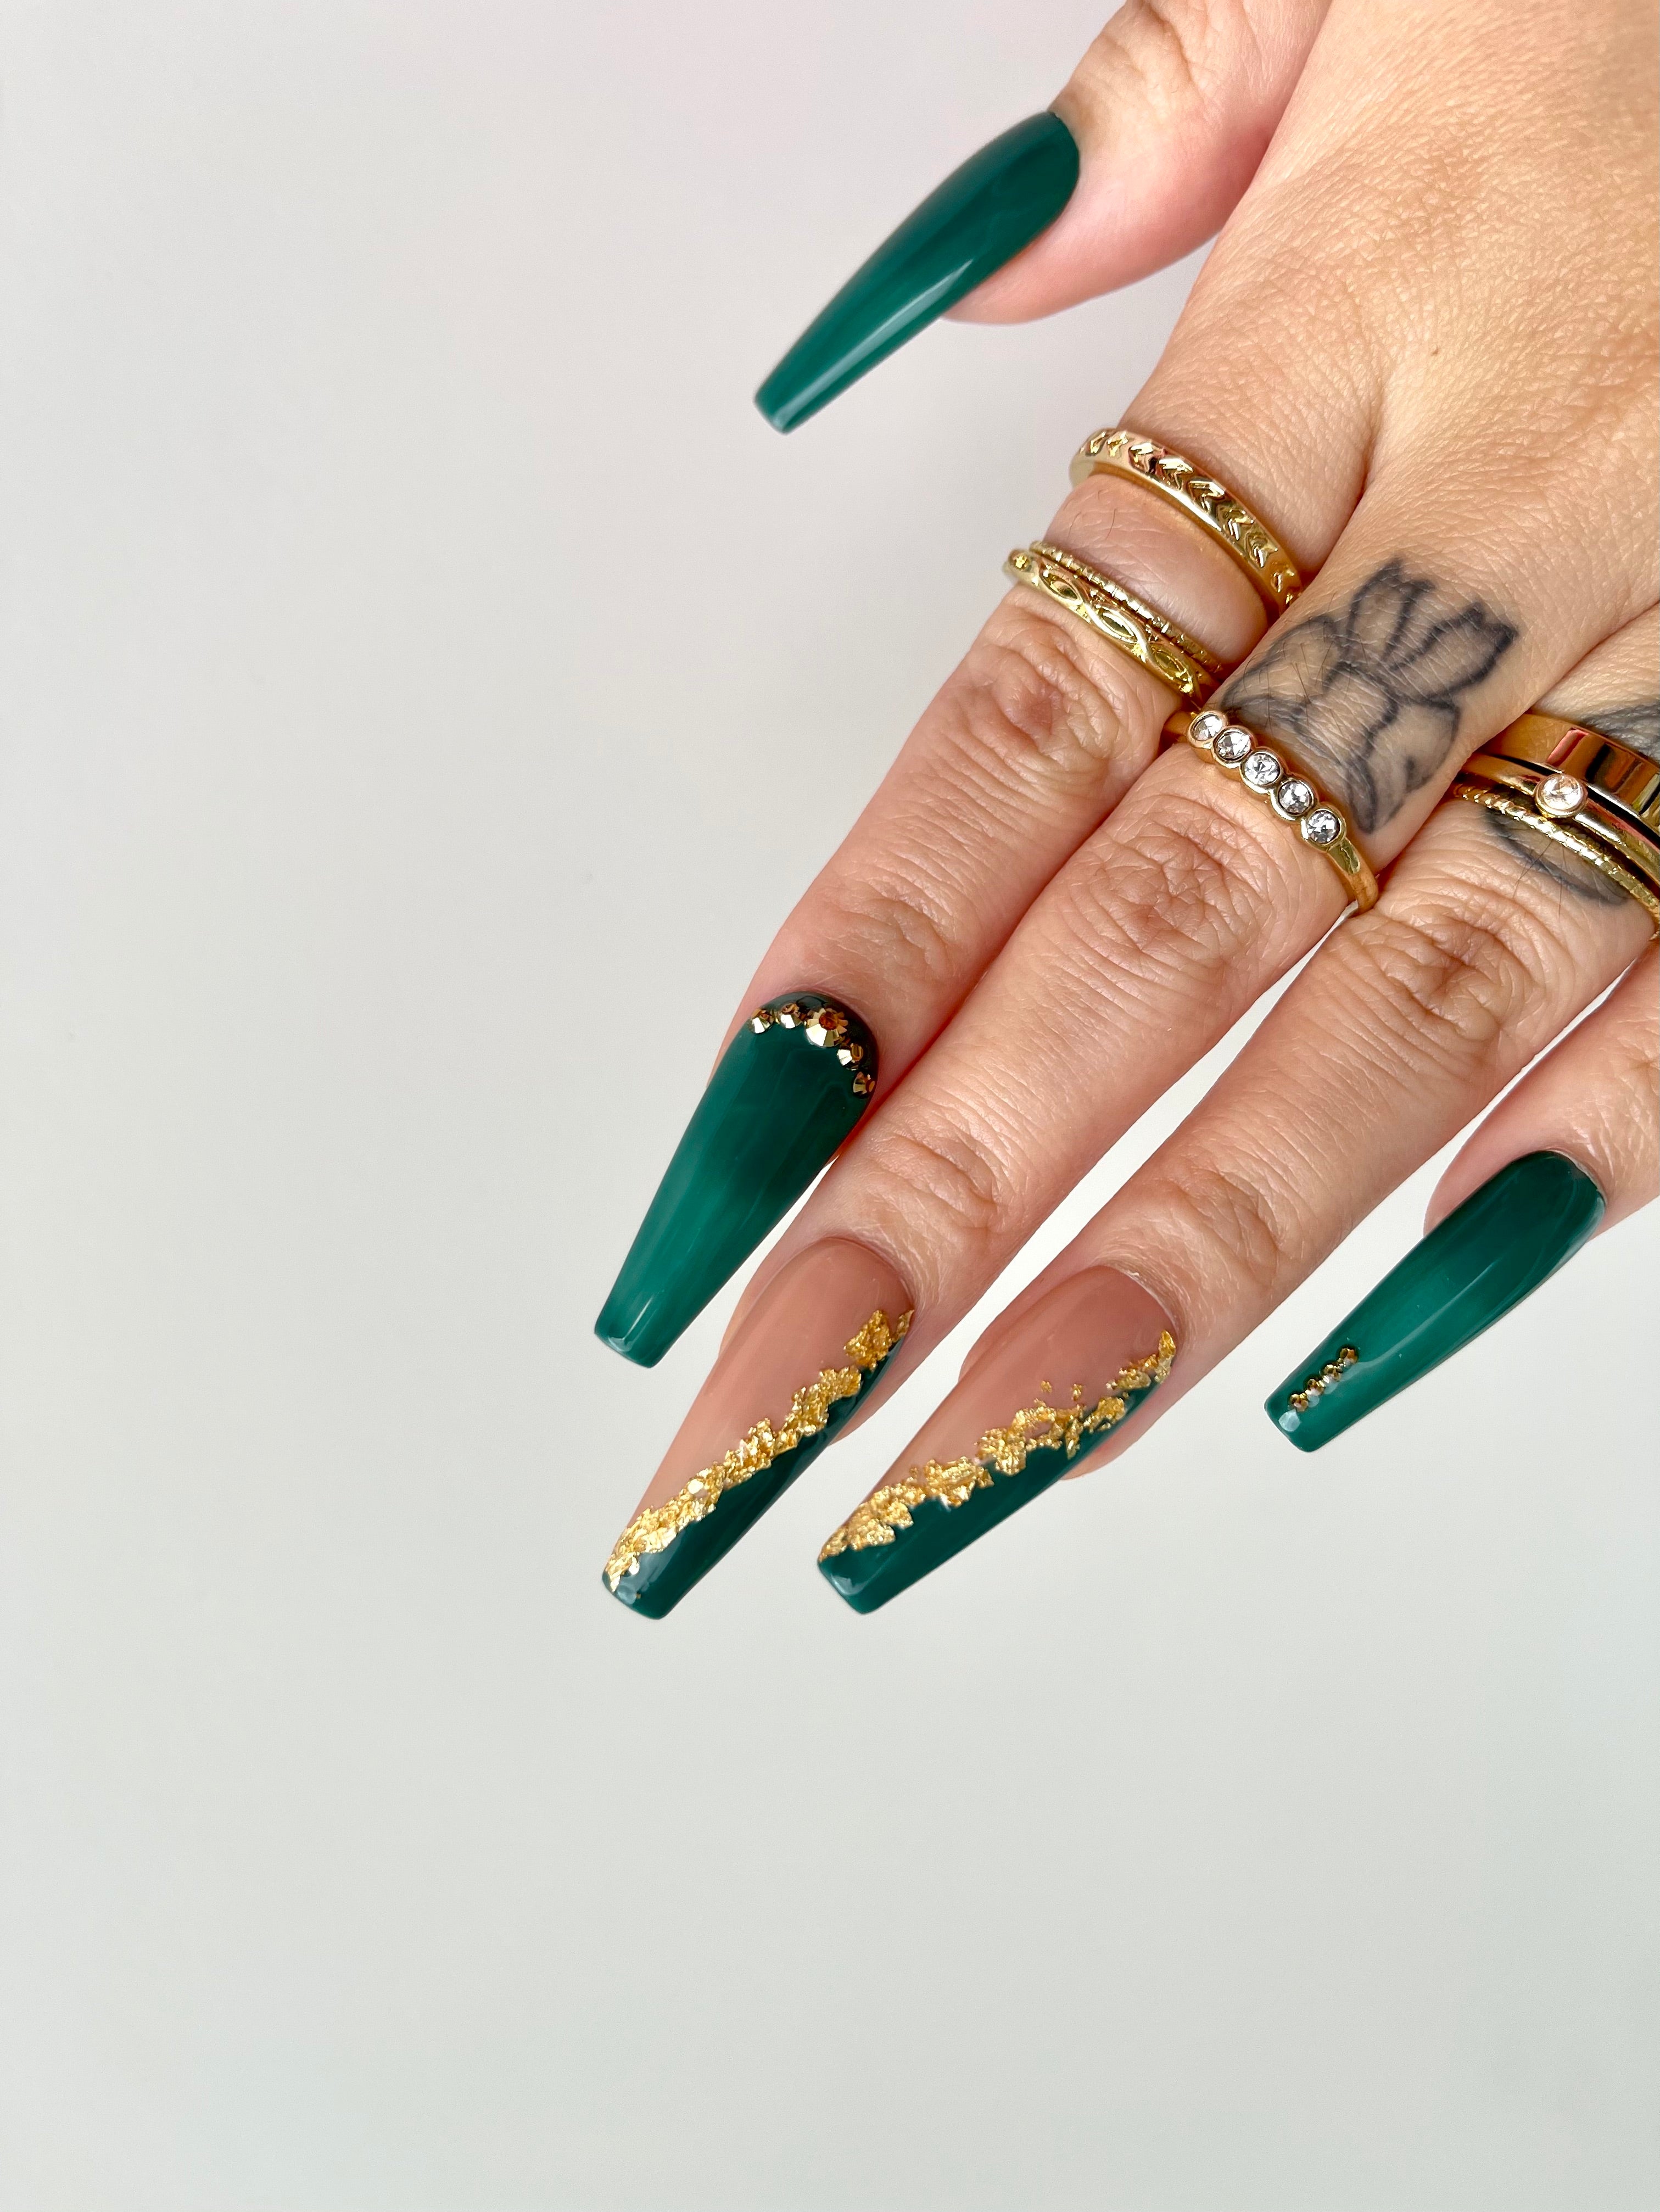 73 Green Nail Ideas to Fresh Your Style in Any Season